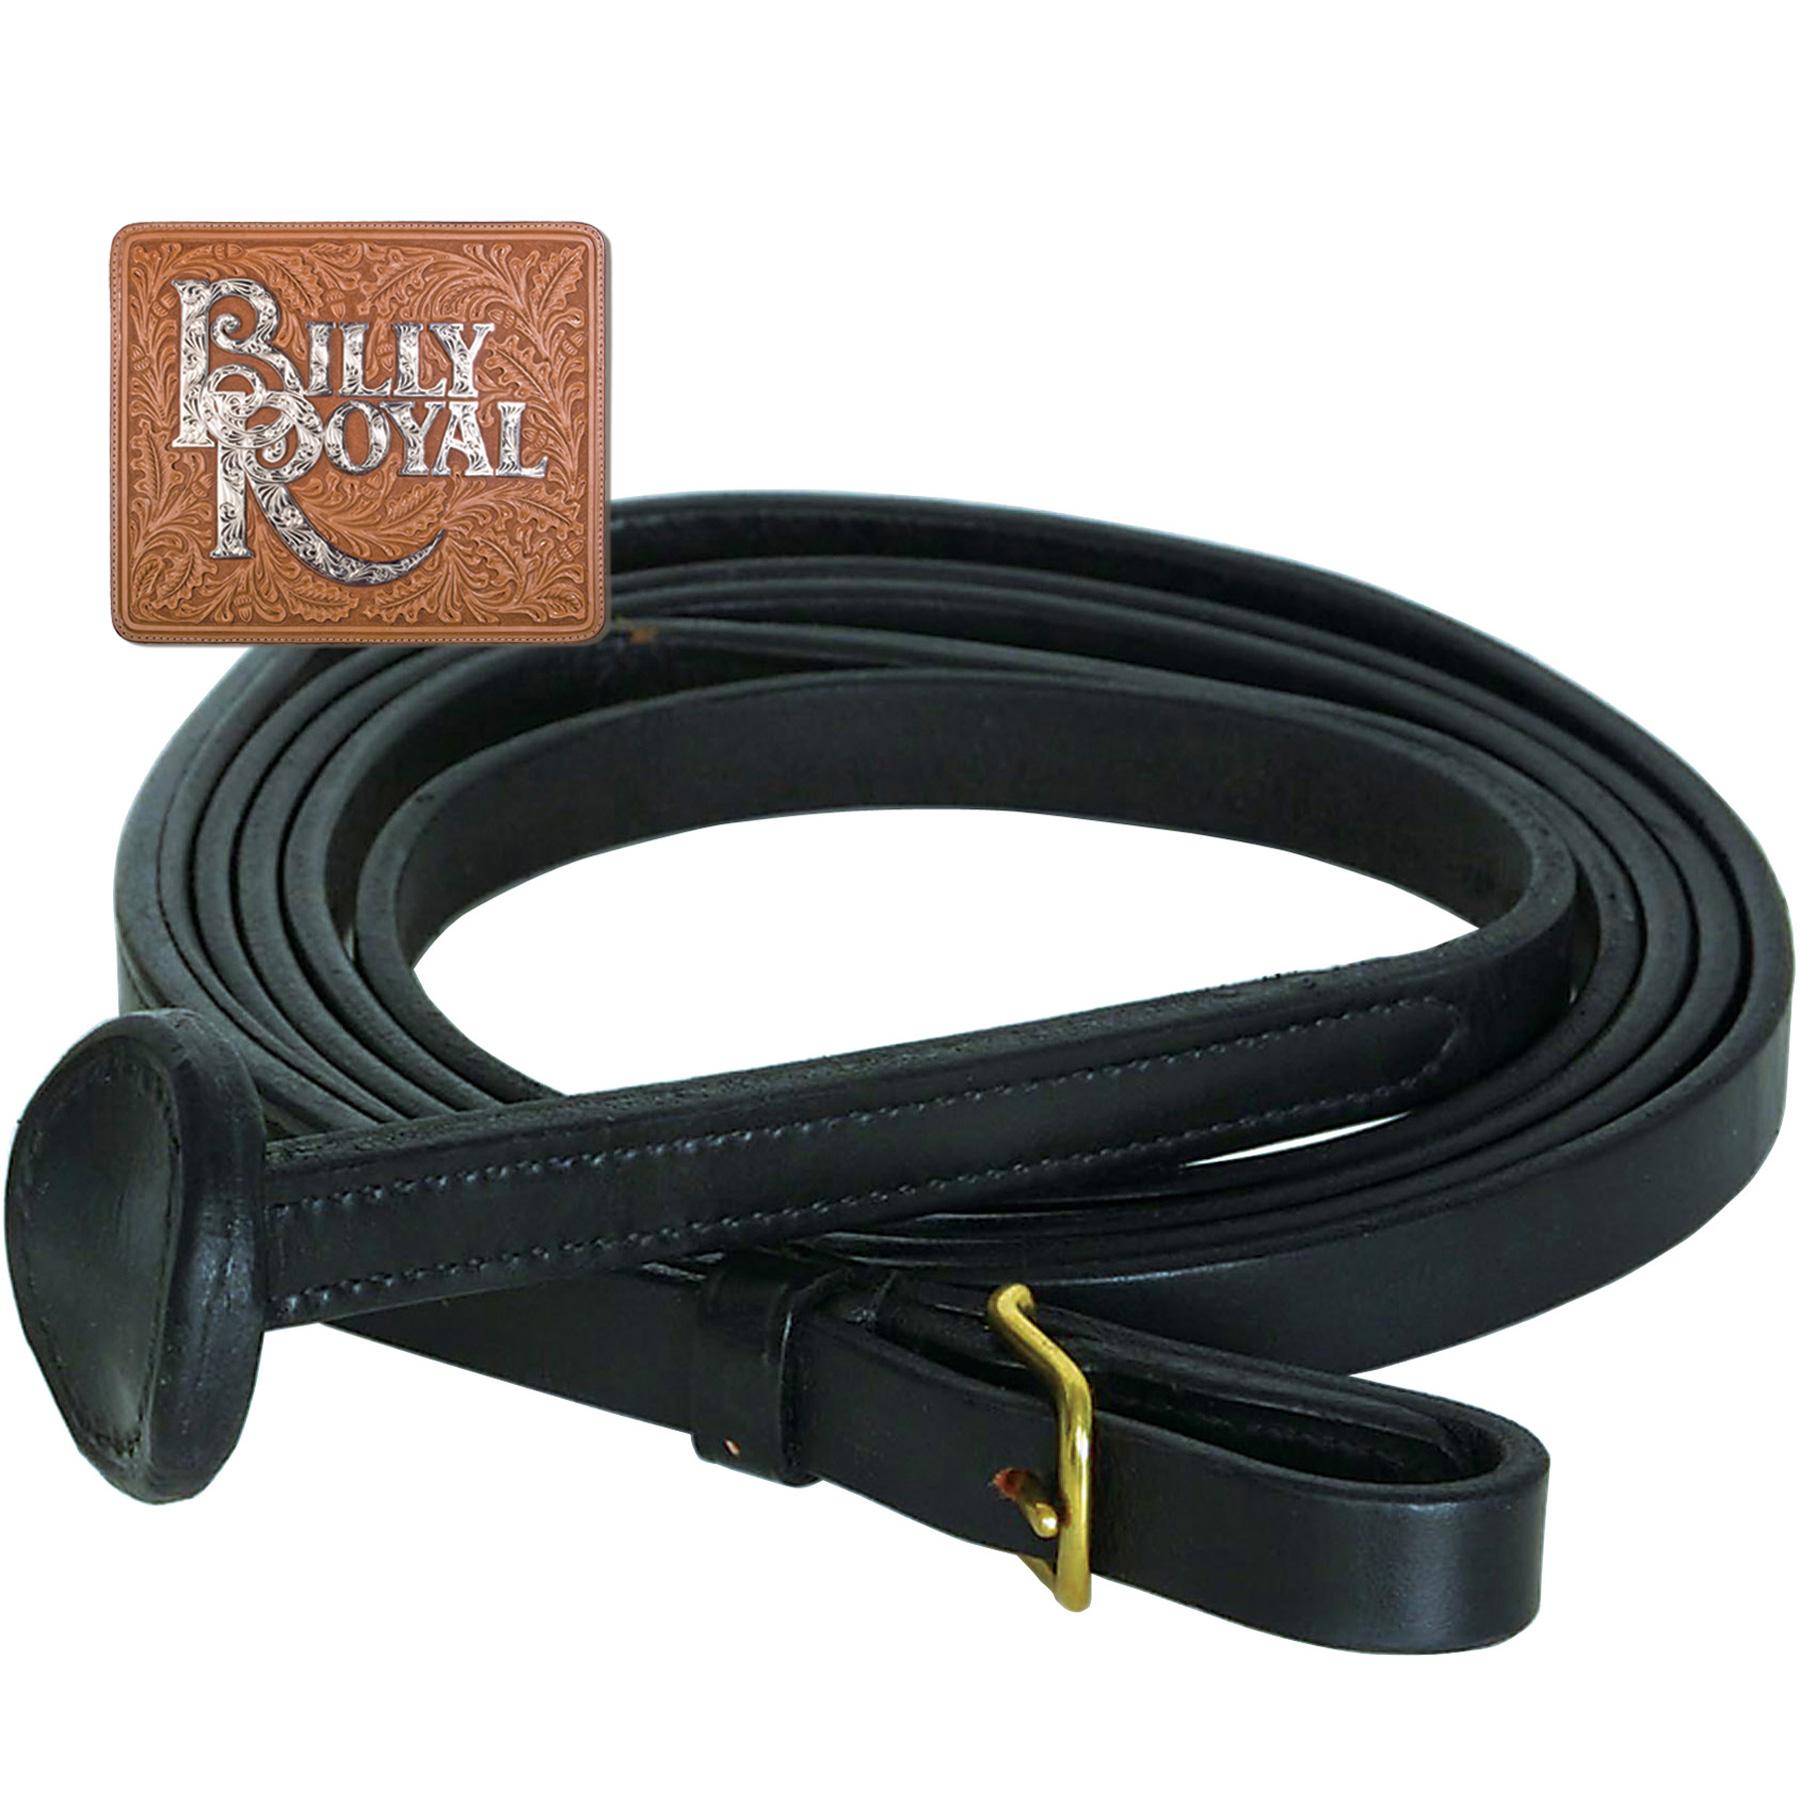 ai05683 Billy Royal® Flat Leather Show Lead